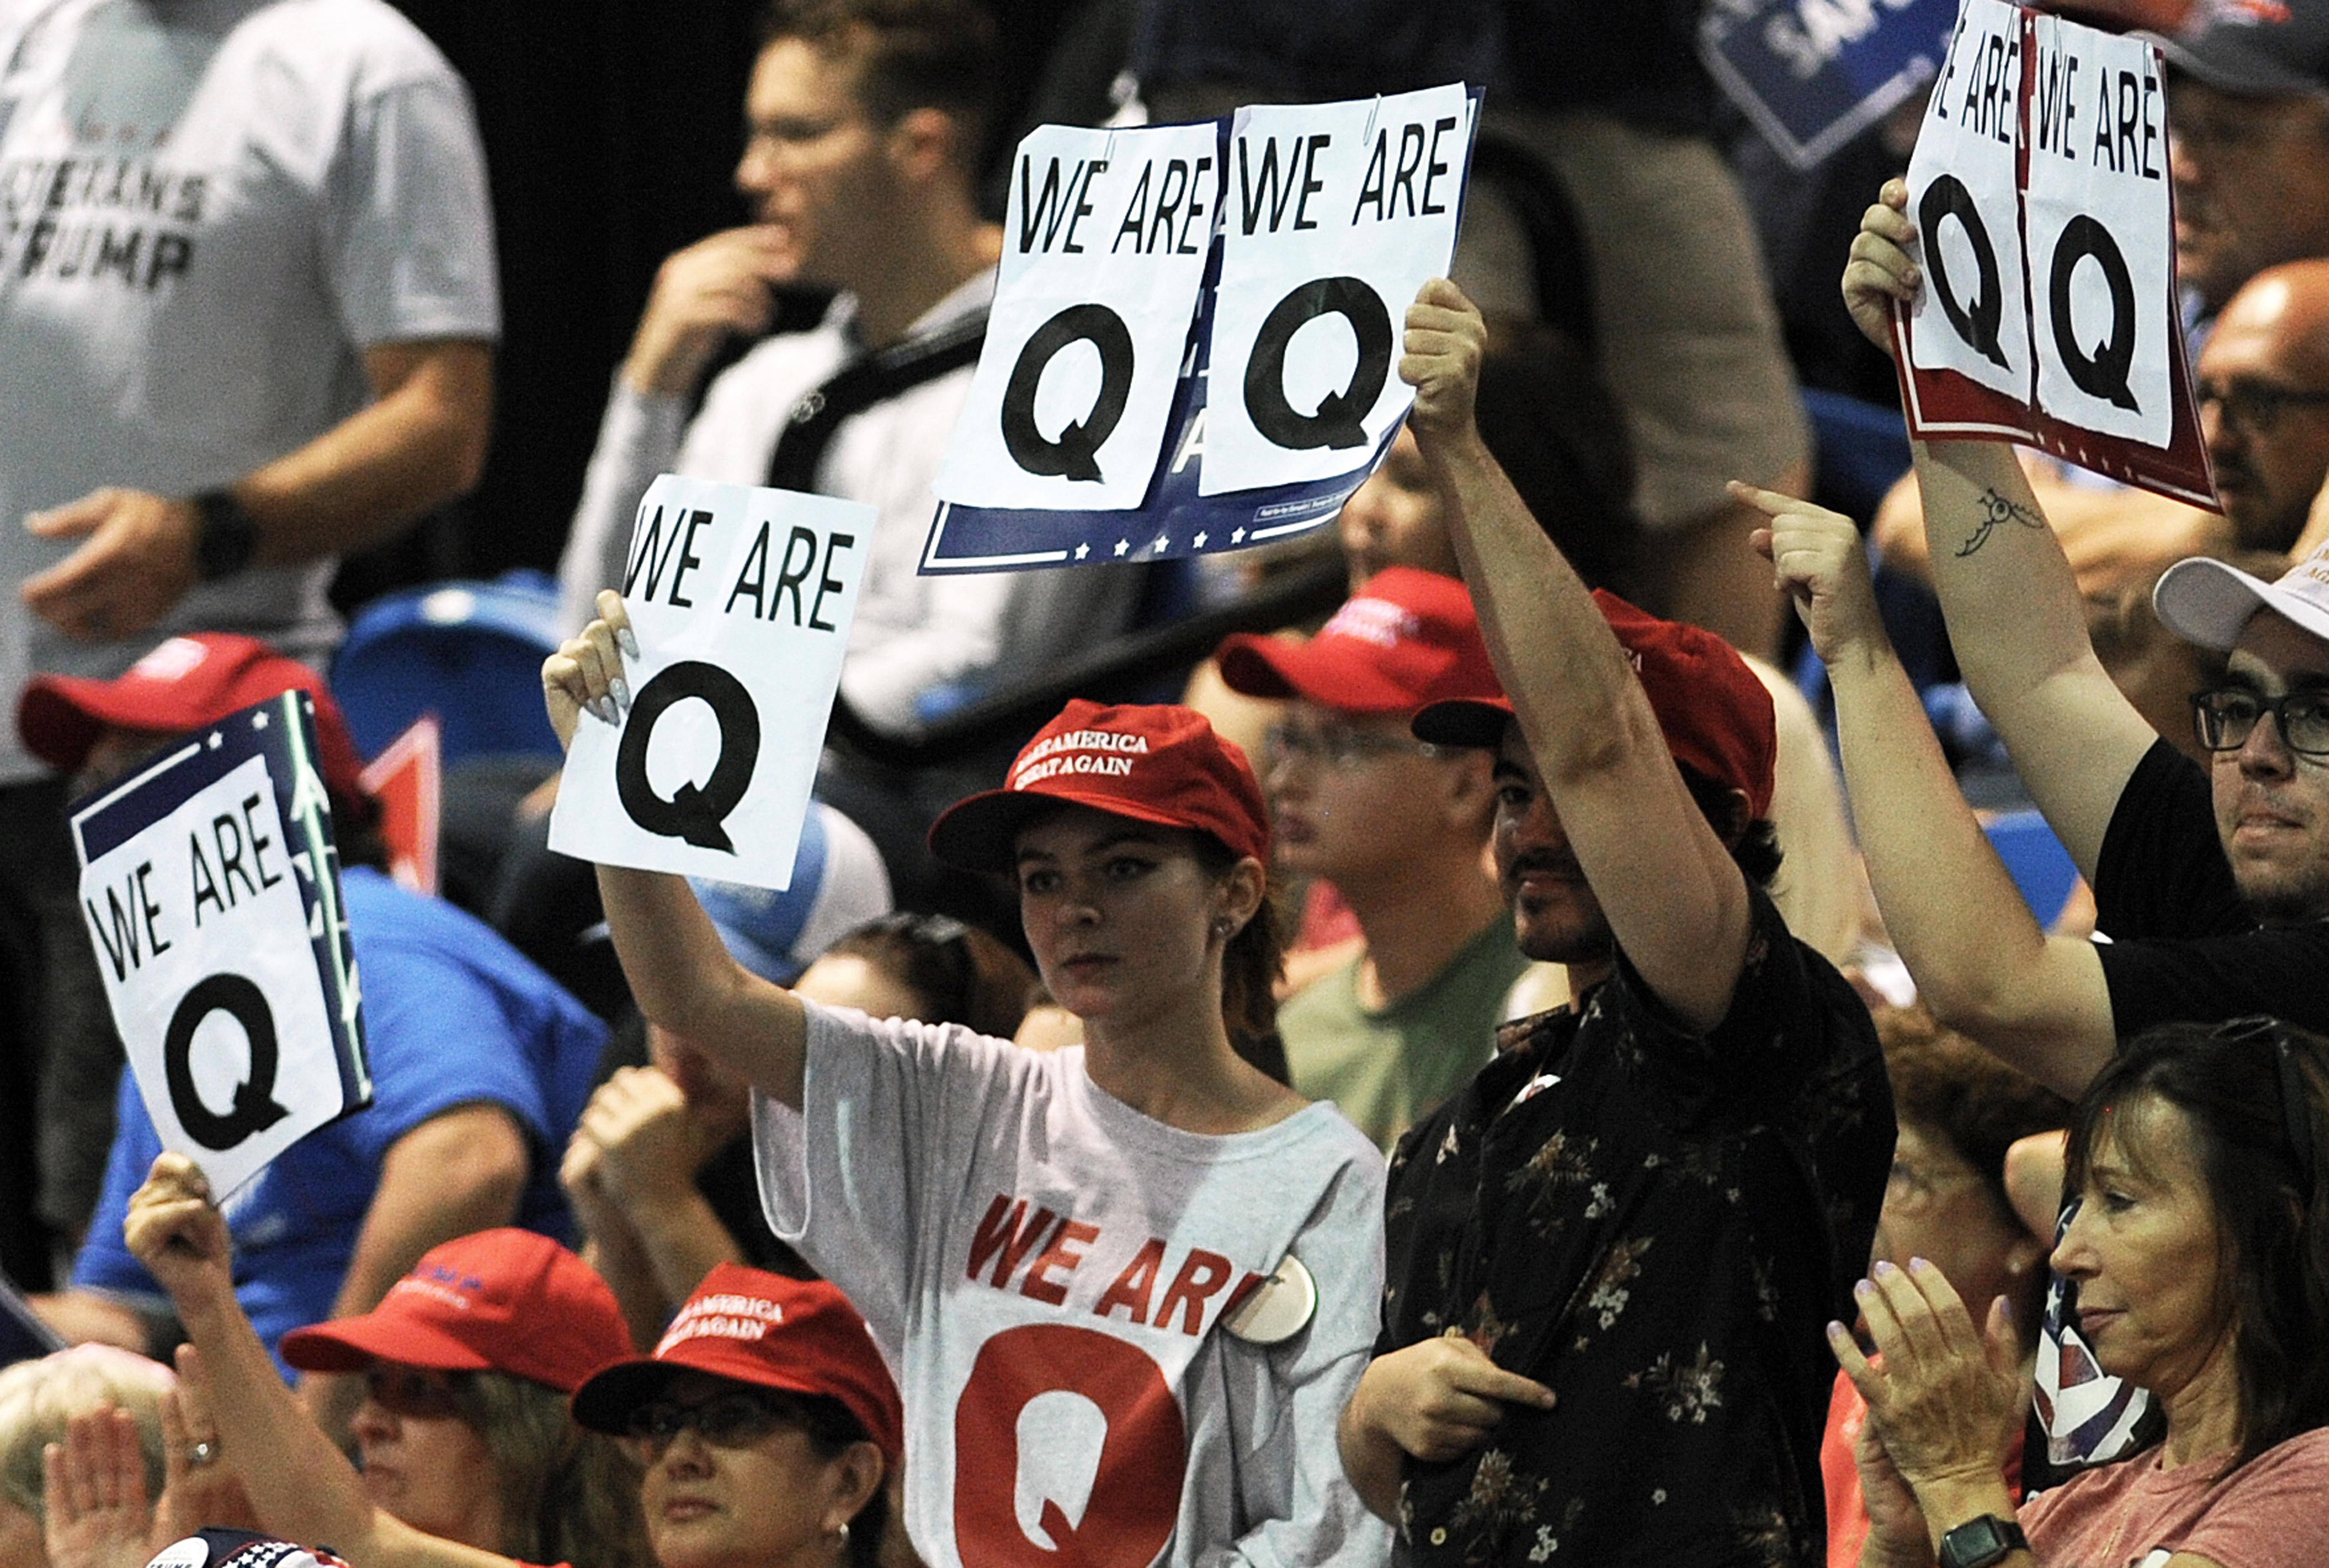 Q Annon supporters holding signs and wearing shirts with large letter Q's on them.